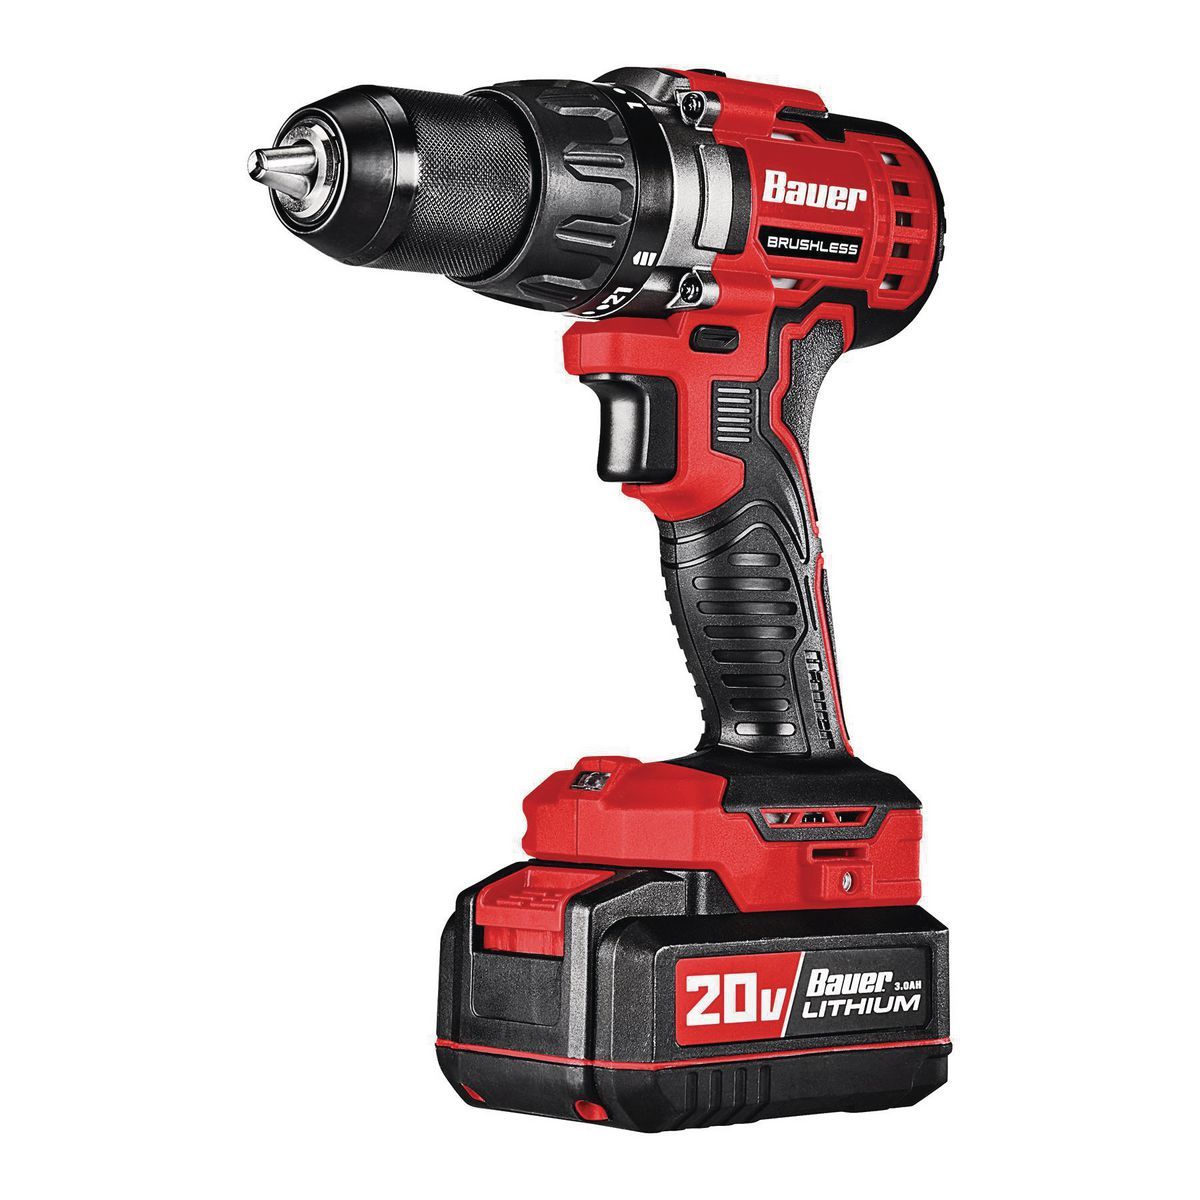 BAUER 20V Brushless Cordless 1/2 in. Drill/Driver - Tool Only